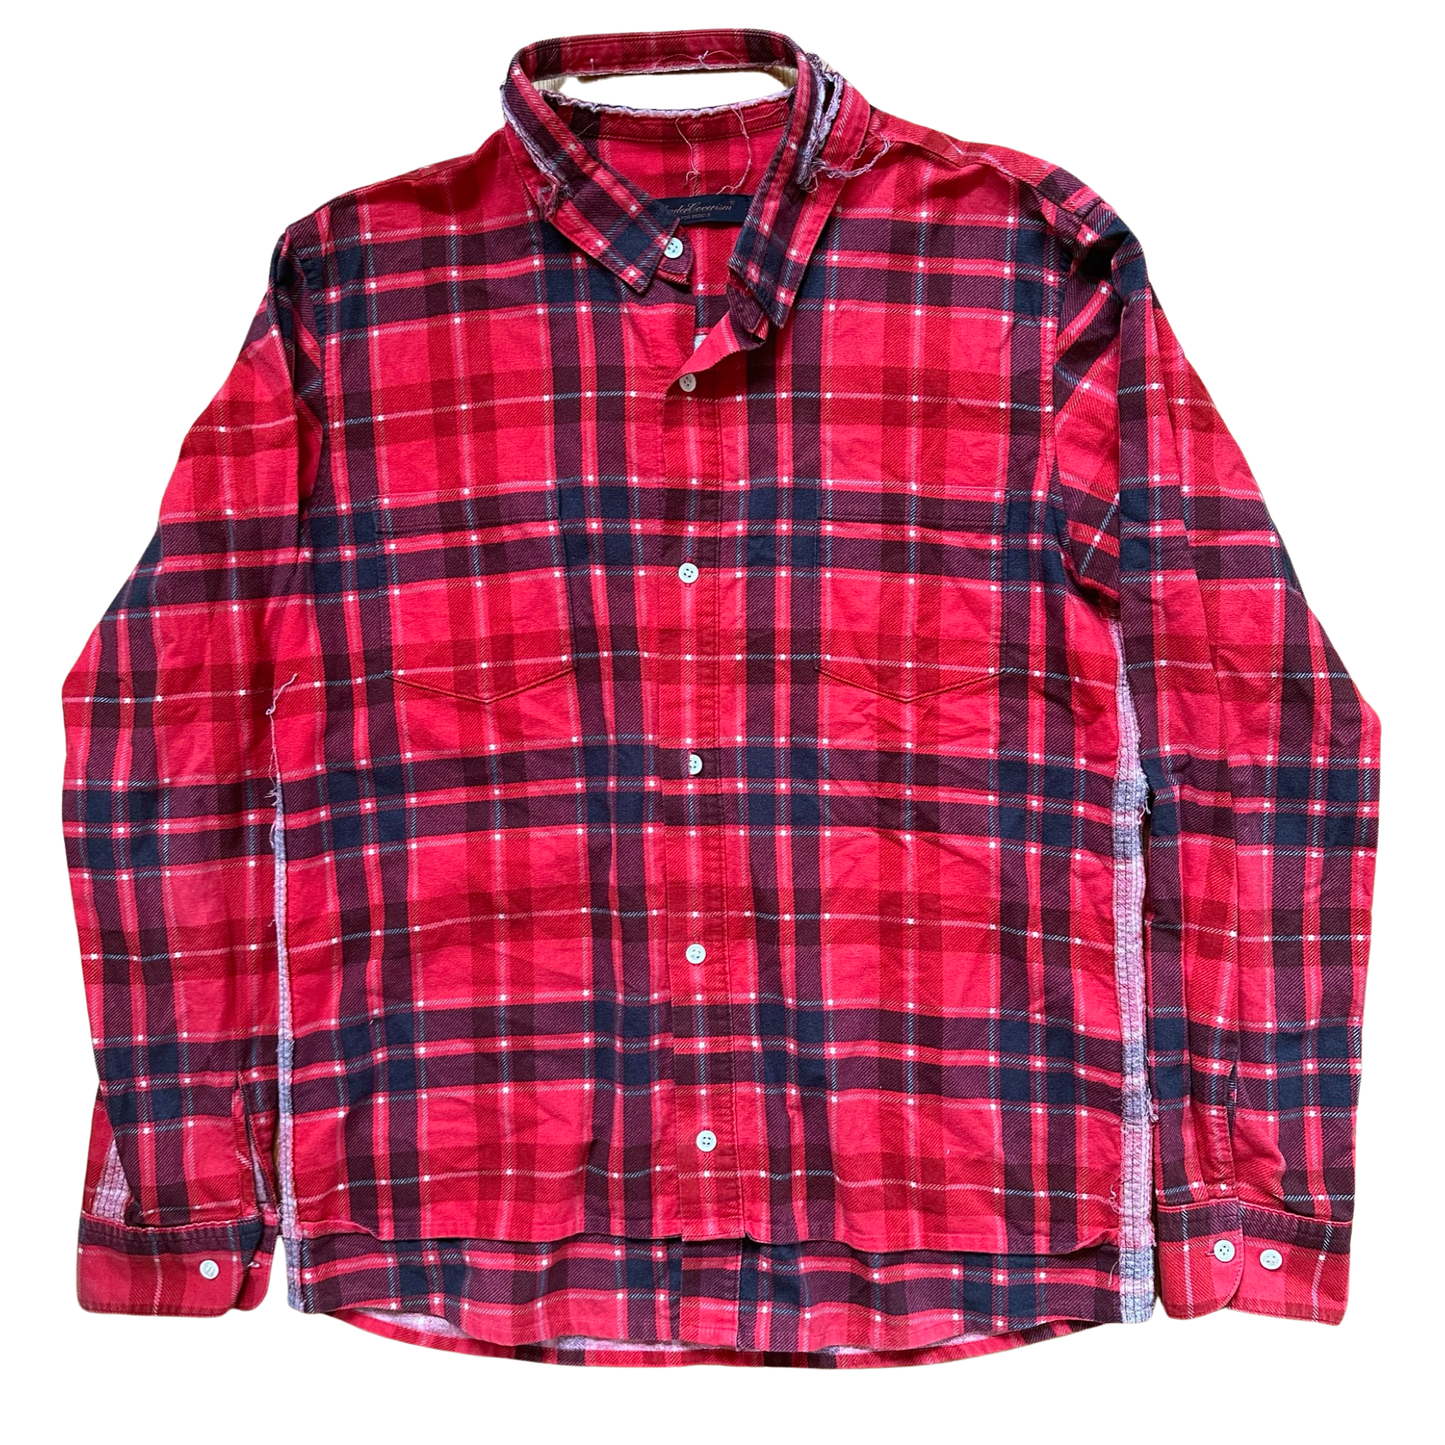 Undercoverism Distressed/Double layer “Scab” Flannel SS03 Sz Large